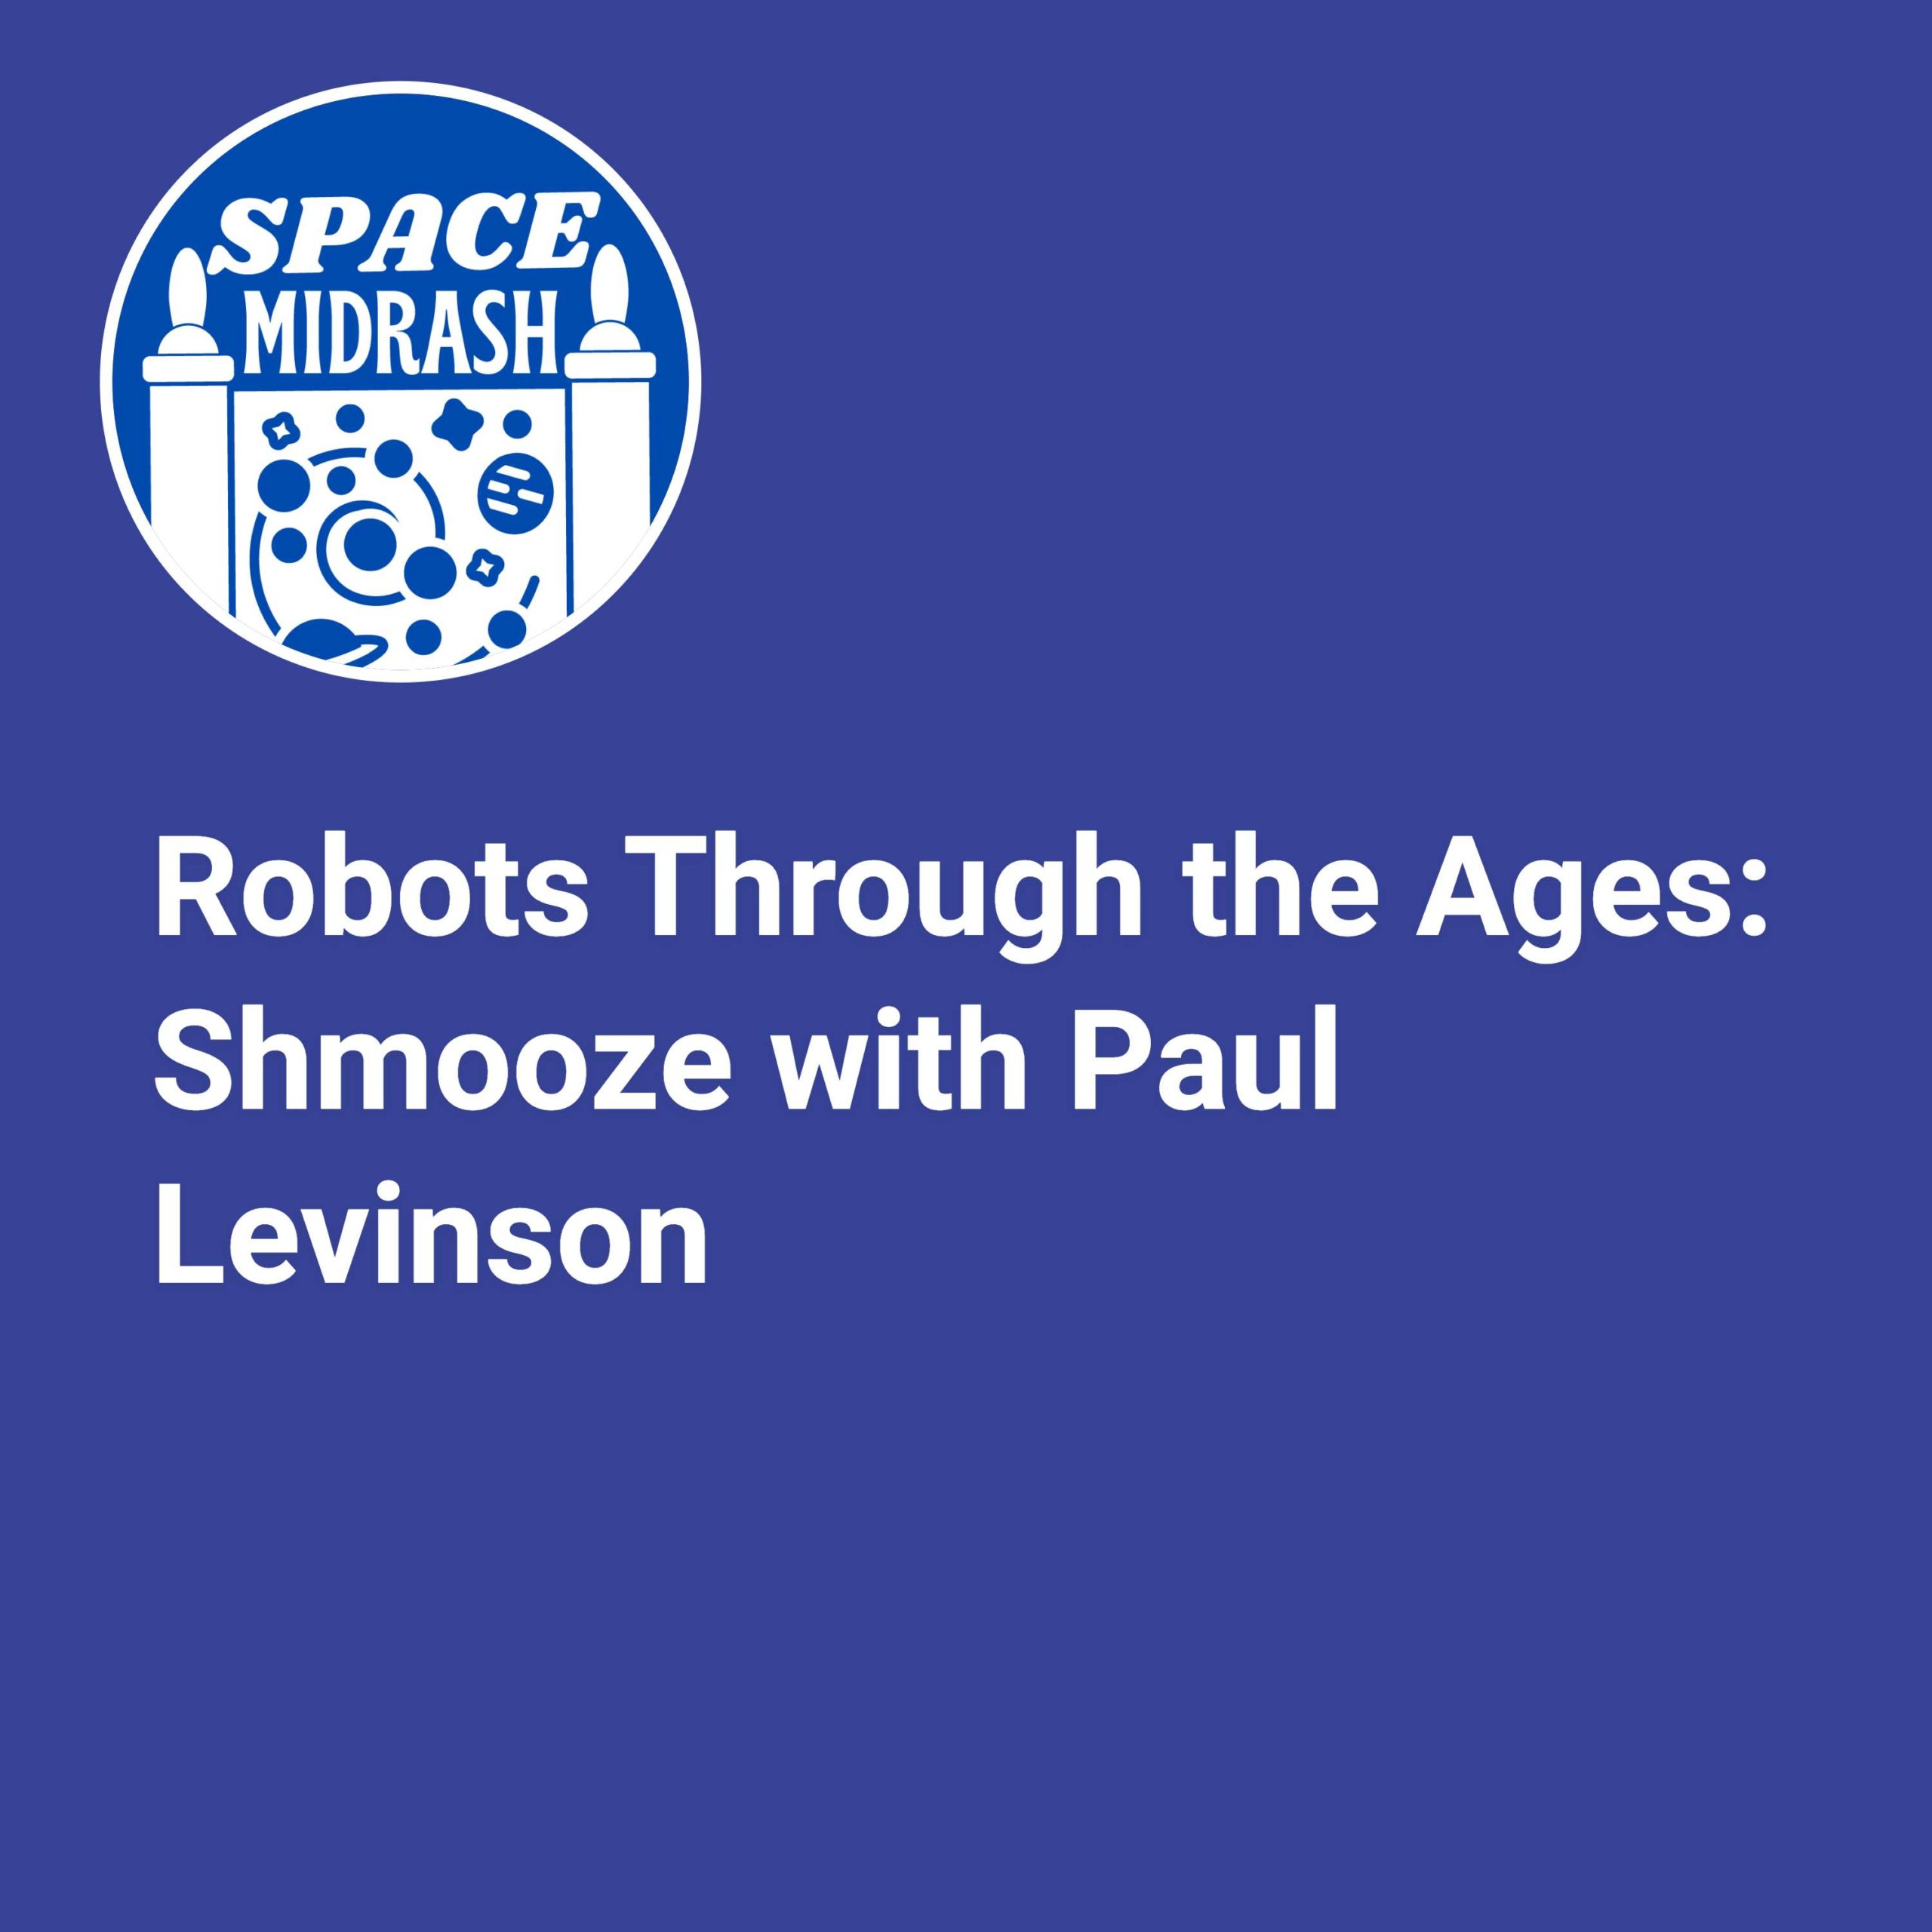 Robots Through the Ages: Shmooze with Paul Levinson